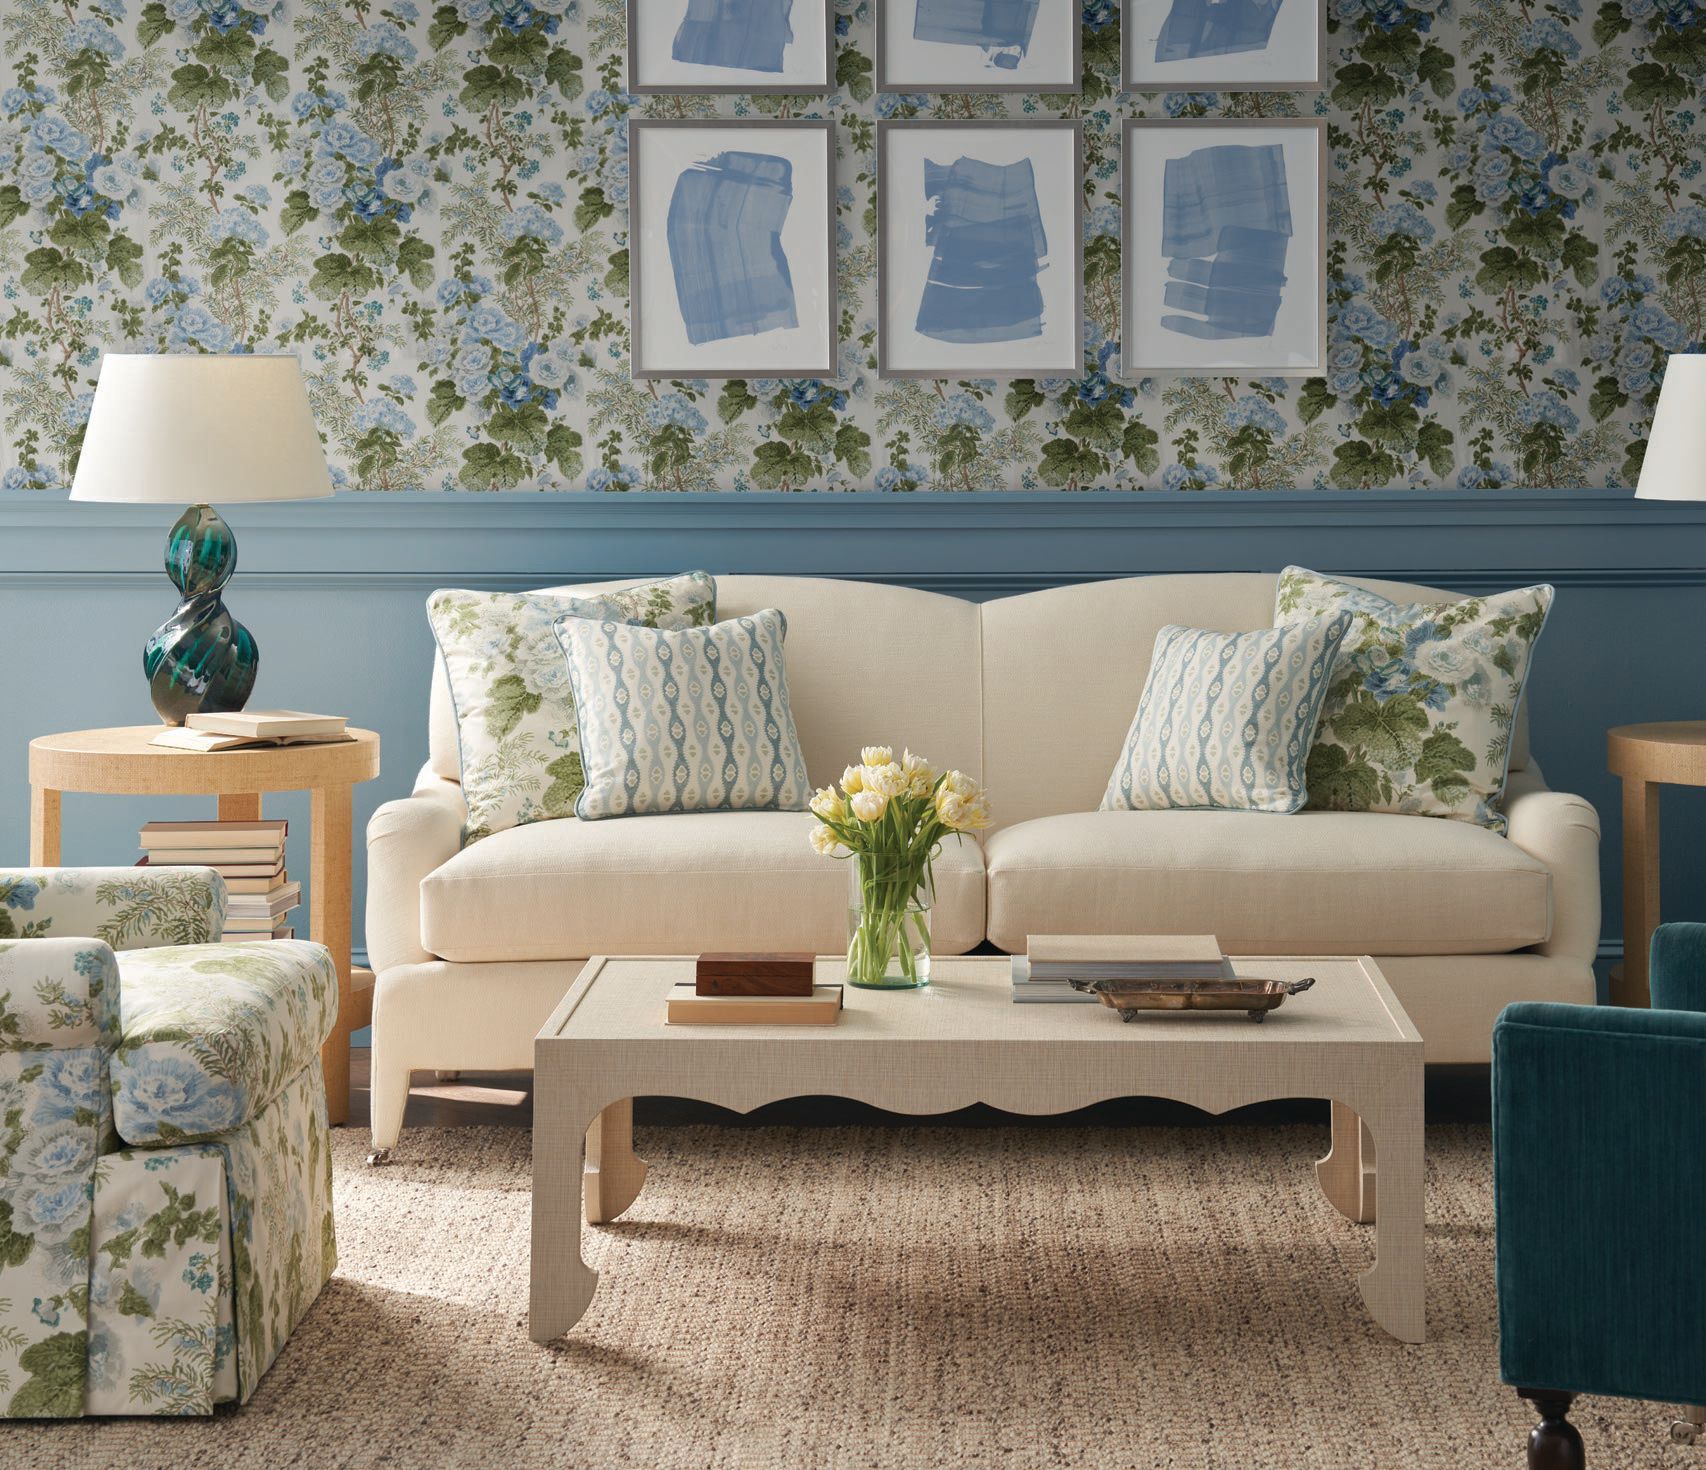 Lee Jofa Celebrates 200 Years With A Timelessly Chic New Collection